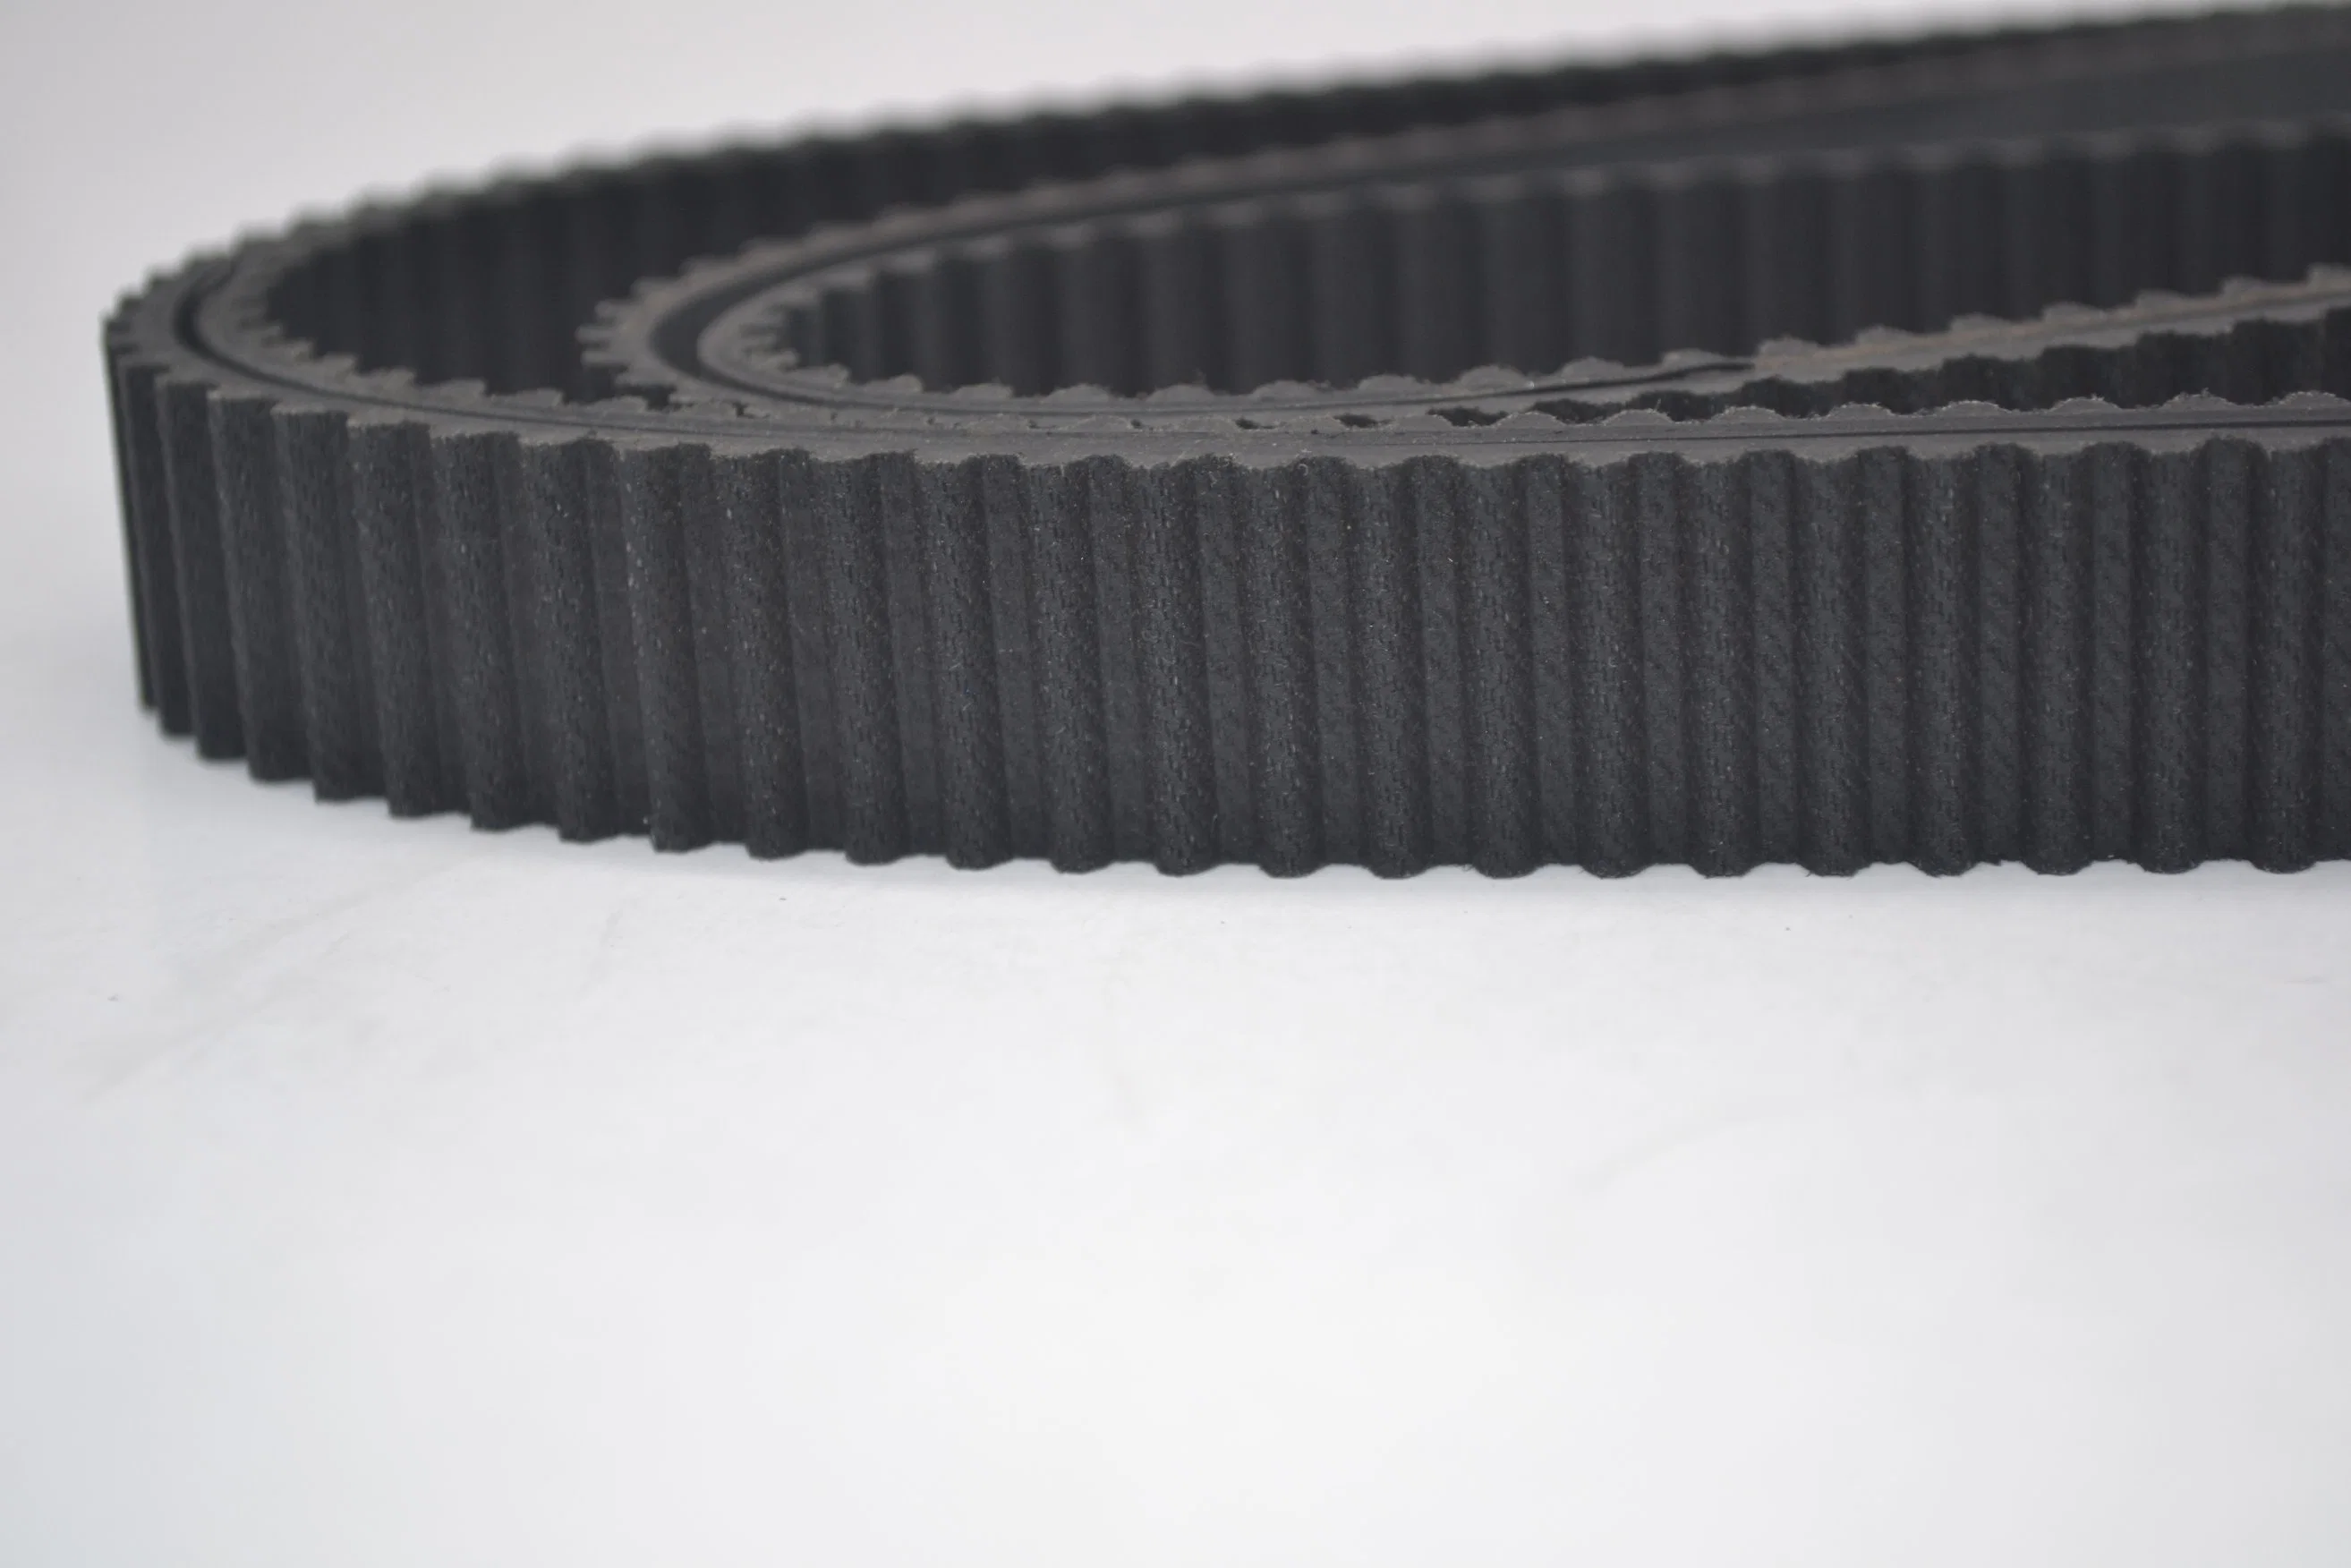 High Synchronization Customized Teeth Rubber Timing Belts for Industrial Accessories and Agricultural Printing Machine Rubber Industrial Timing Belt Htd